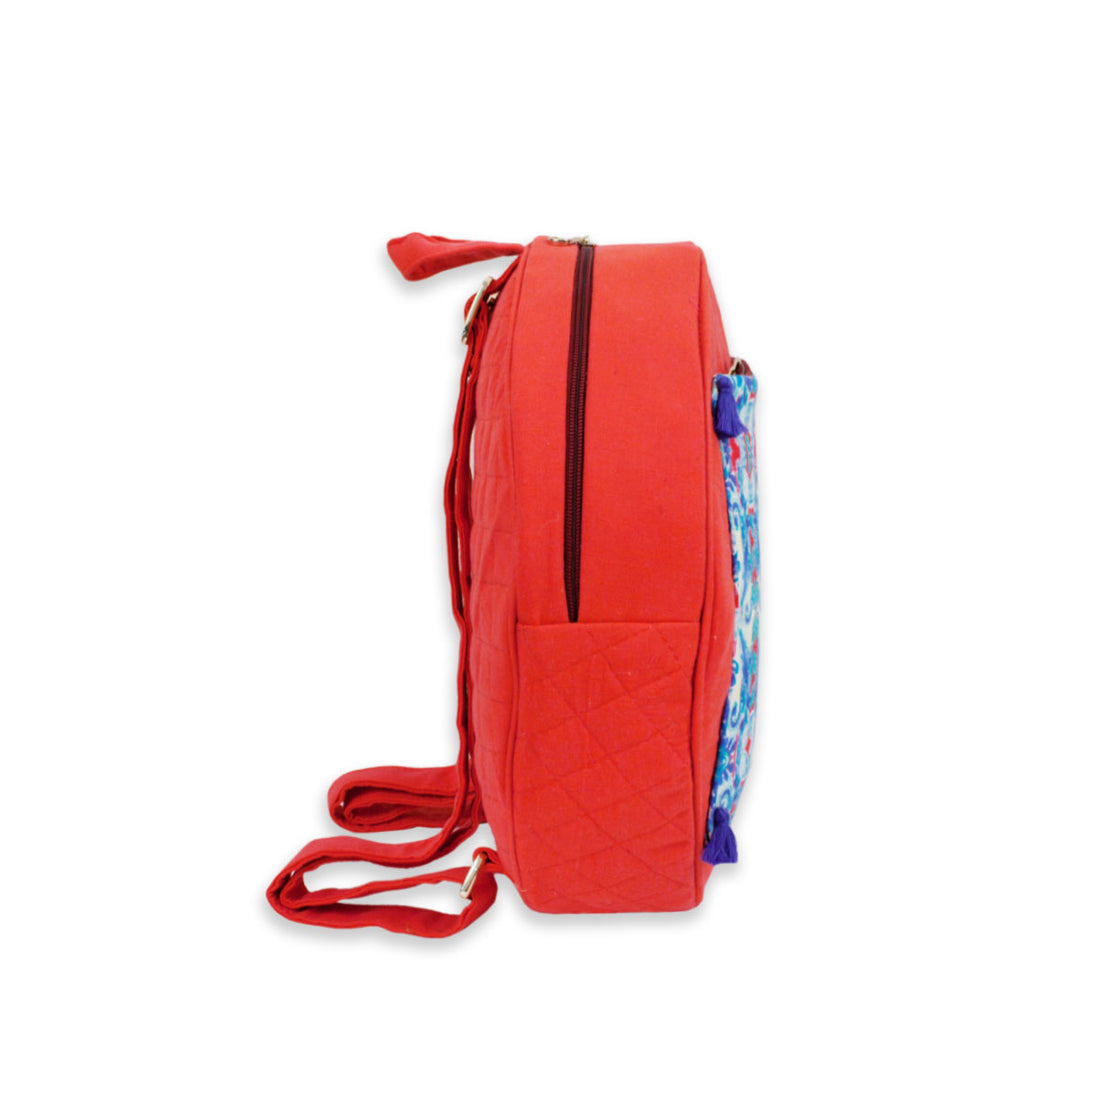 Round Red Backpack